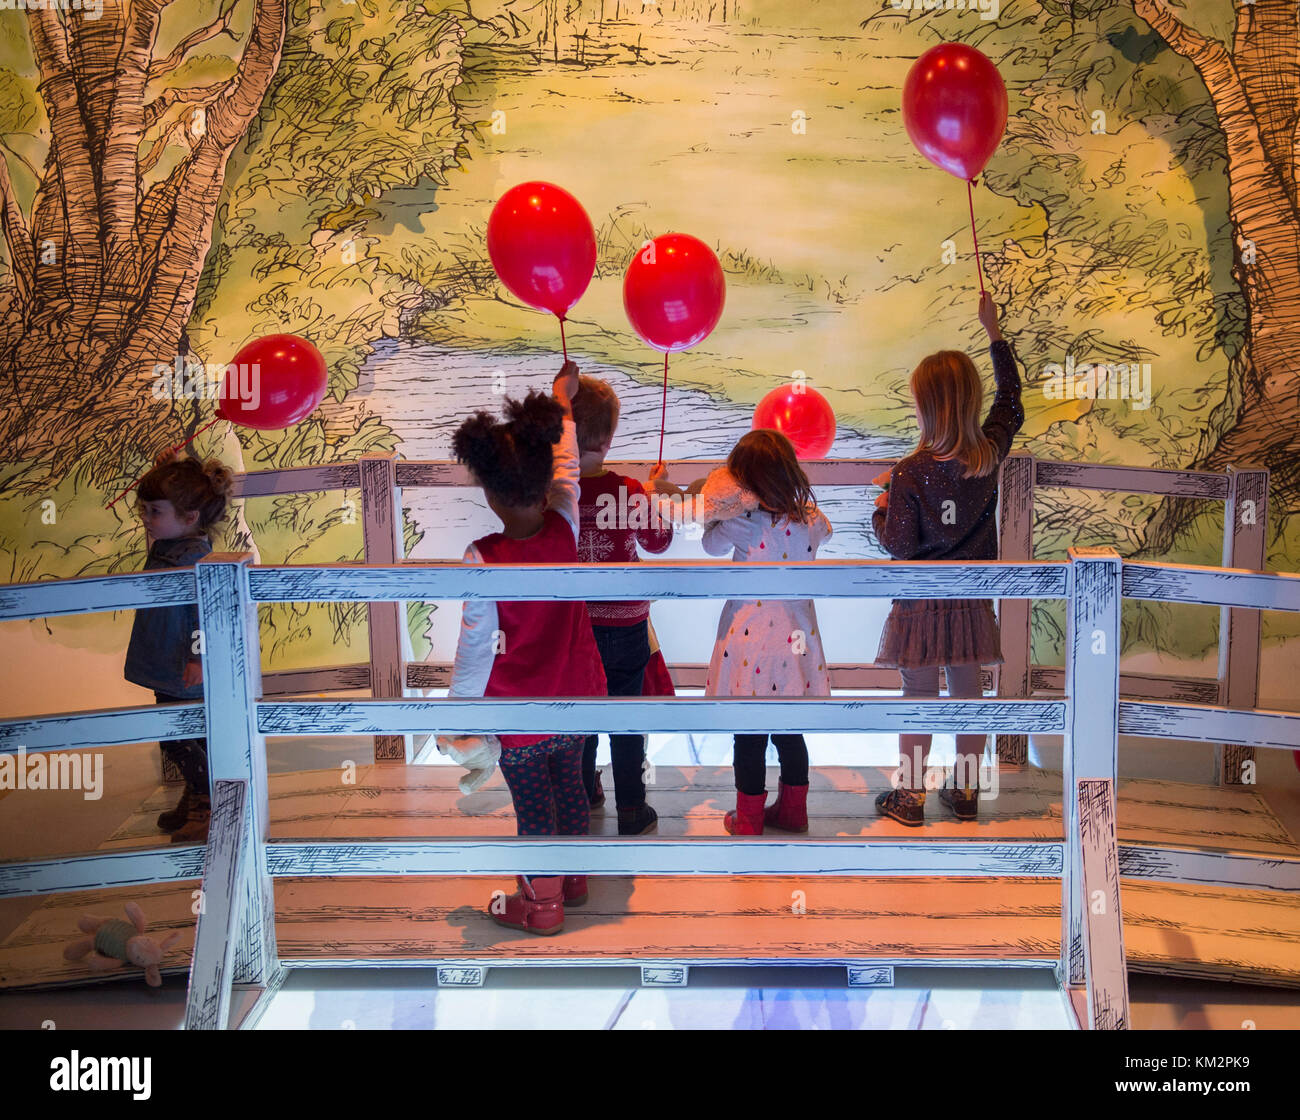 V&A, London, UK. 4 December, 2017. Young children playing and discovering the new V&A Winnie-the-Pooh: Exploring a Classic exhibition, which includes large, hand-painted backdrops of the Hundred Acre Wood and a recreation of the famous Poohsticks Bridge. The original drawings of Winnie-the-Pooh are on display at the V&A for the first time in nearly 40 years as part of the UK’s largest ever exhibition on Winnie-the-Pooh, A.A. Milne and E.H. Shepard. Credit: Malcolm Park editorial/Alamy Live News Stock Photo